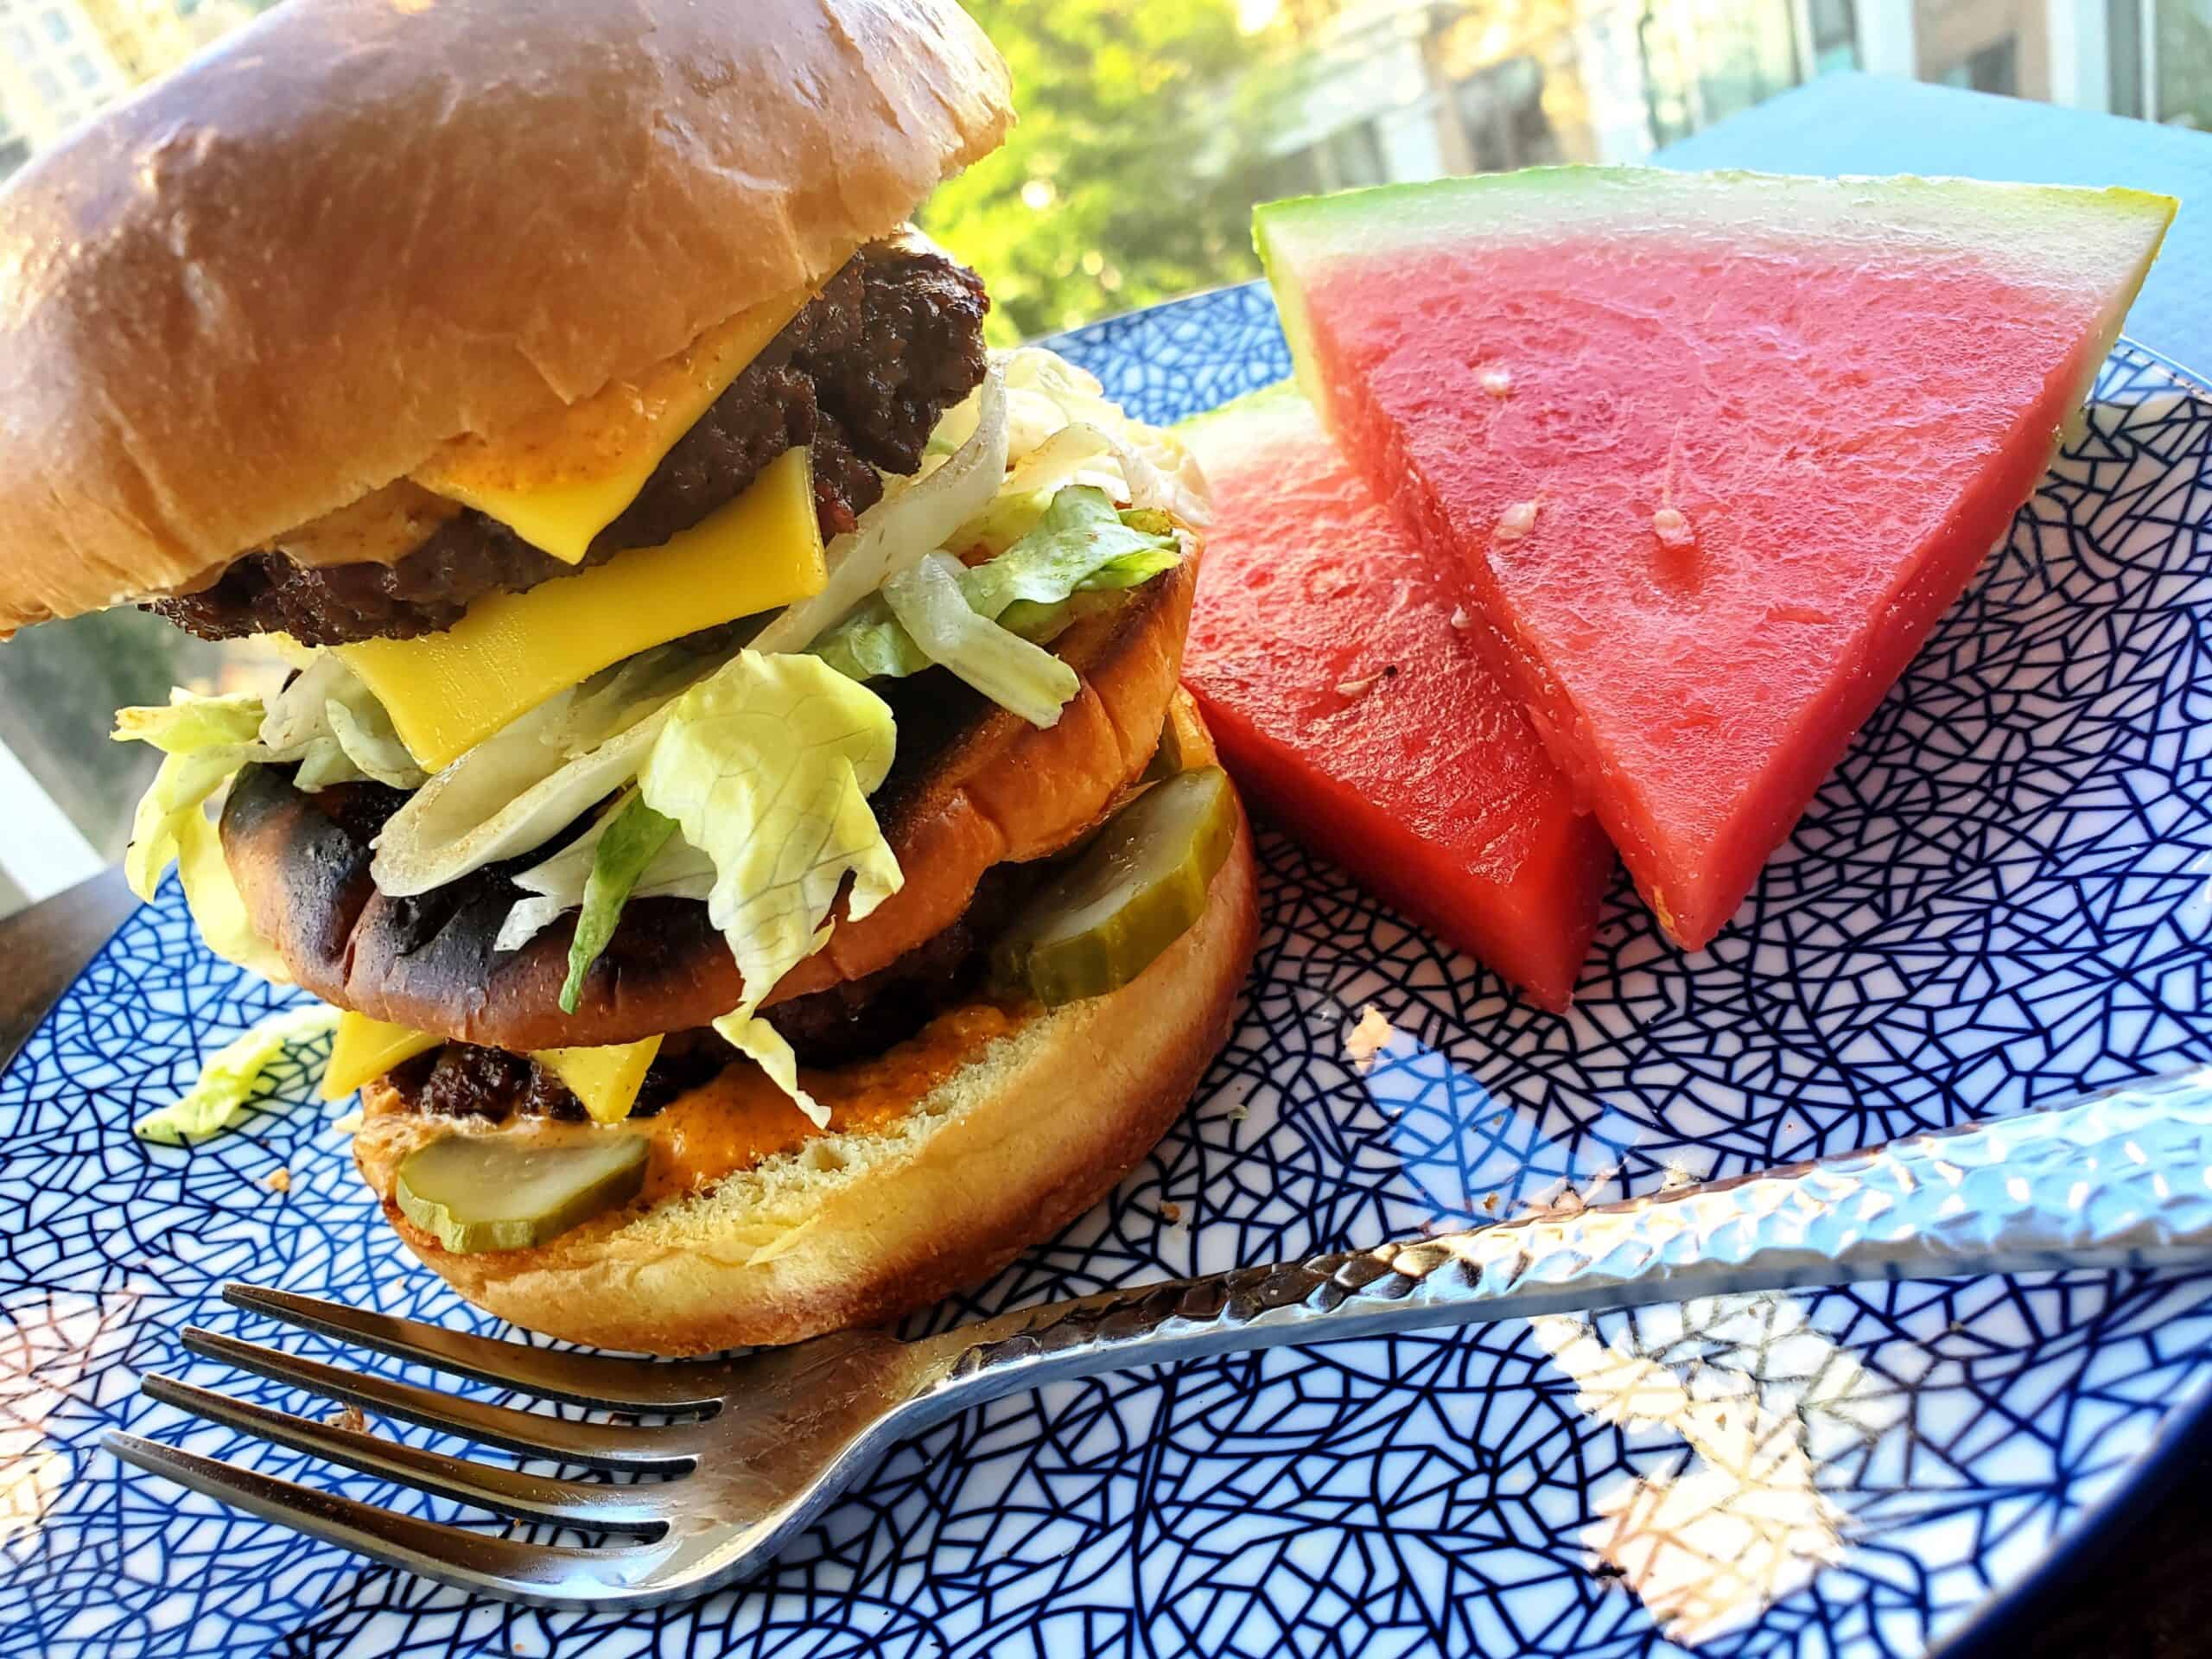 Perfecting the Patio Picnic with Ecofriendly Drinks, Burgers & Grill